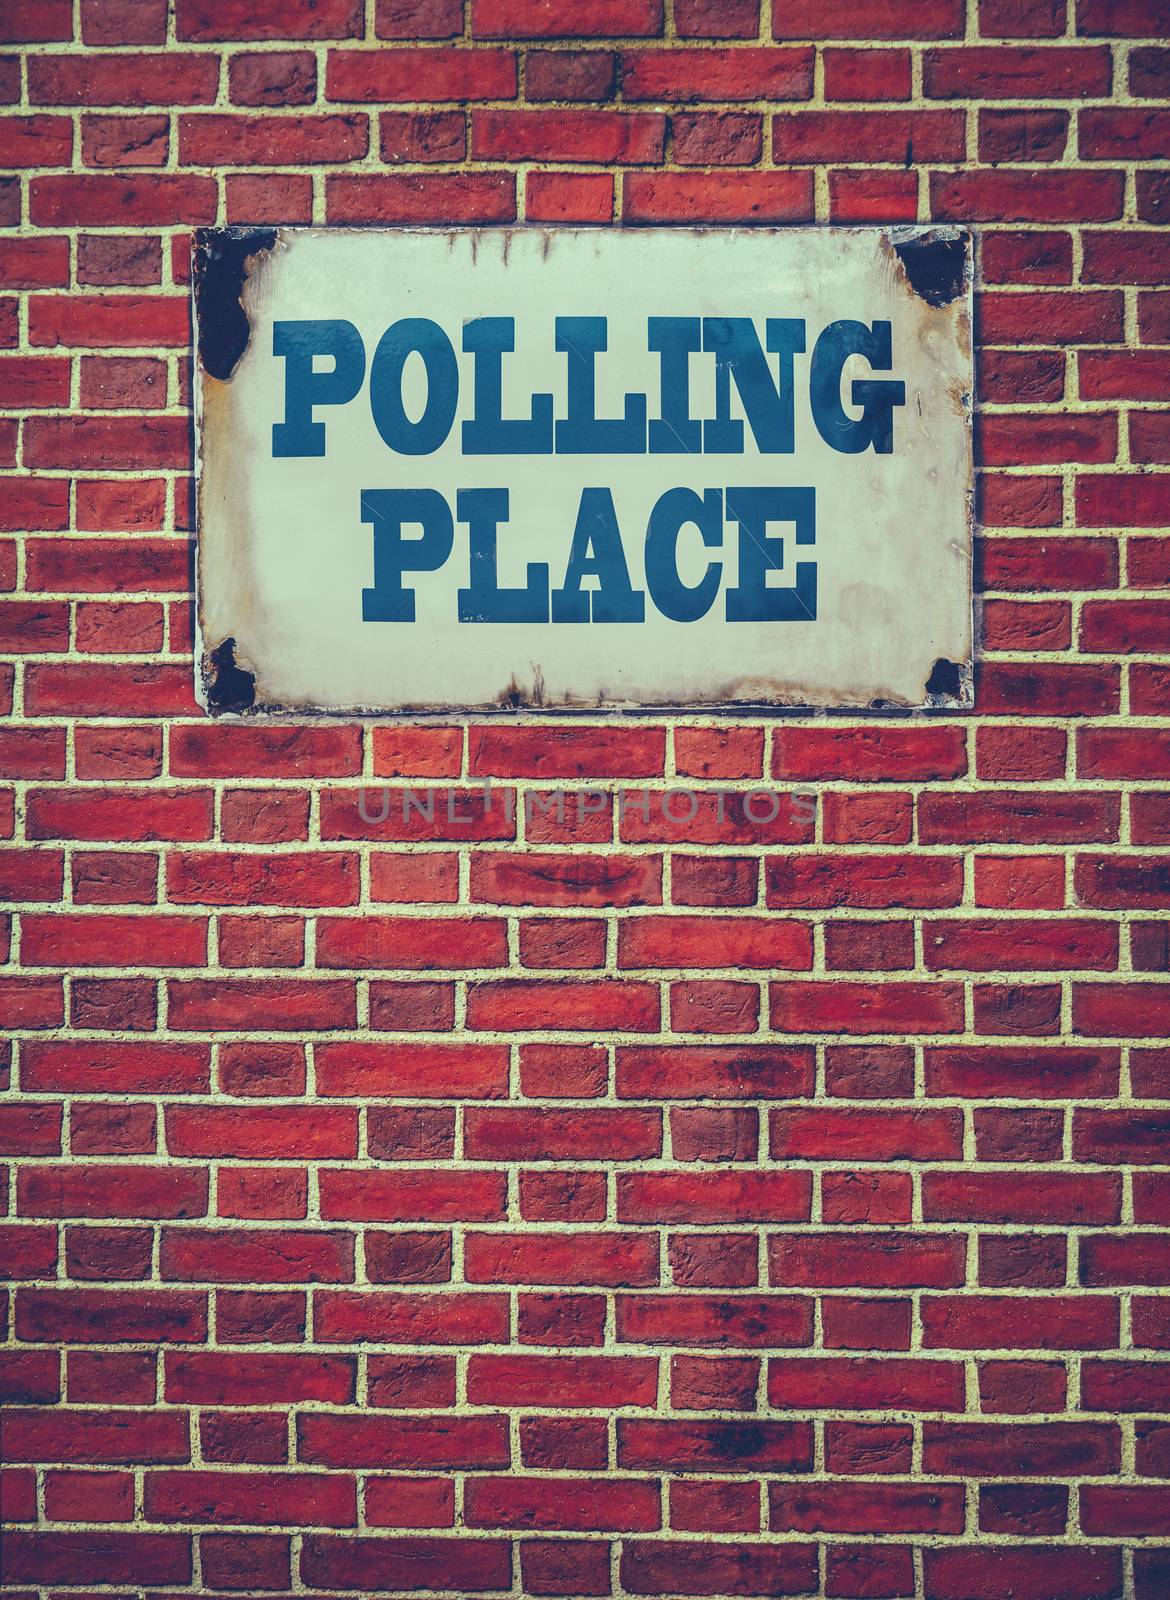 Retro Filtered Sign For An Election Polling Place Or Station On A Red Brick Wall